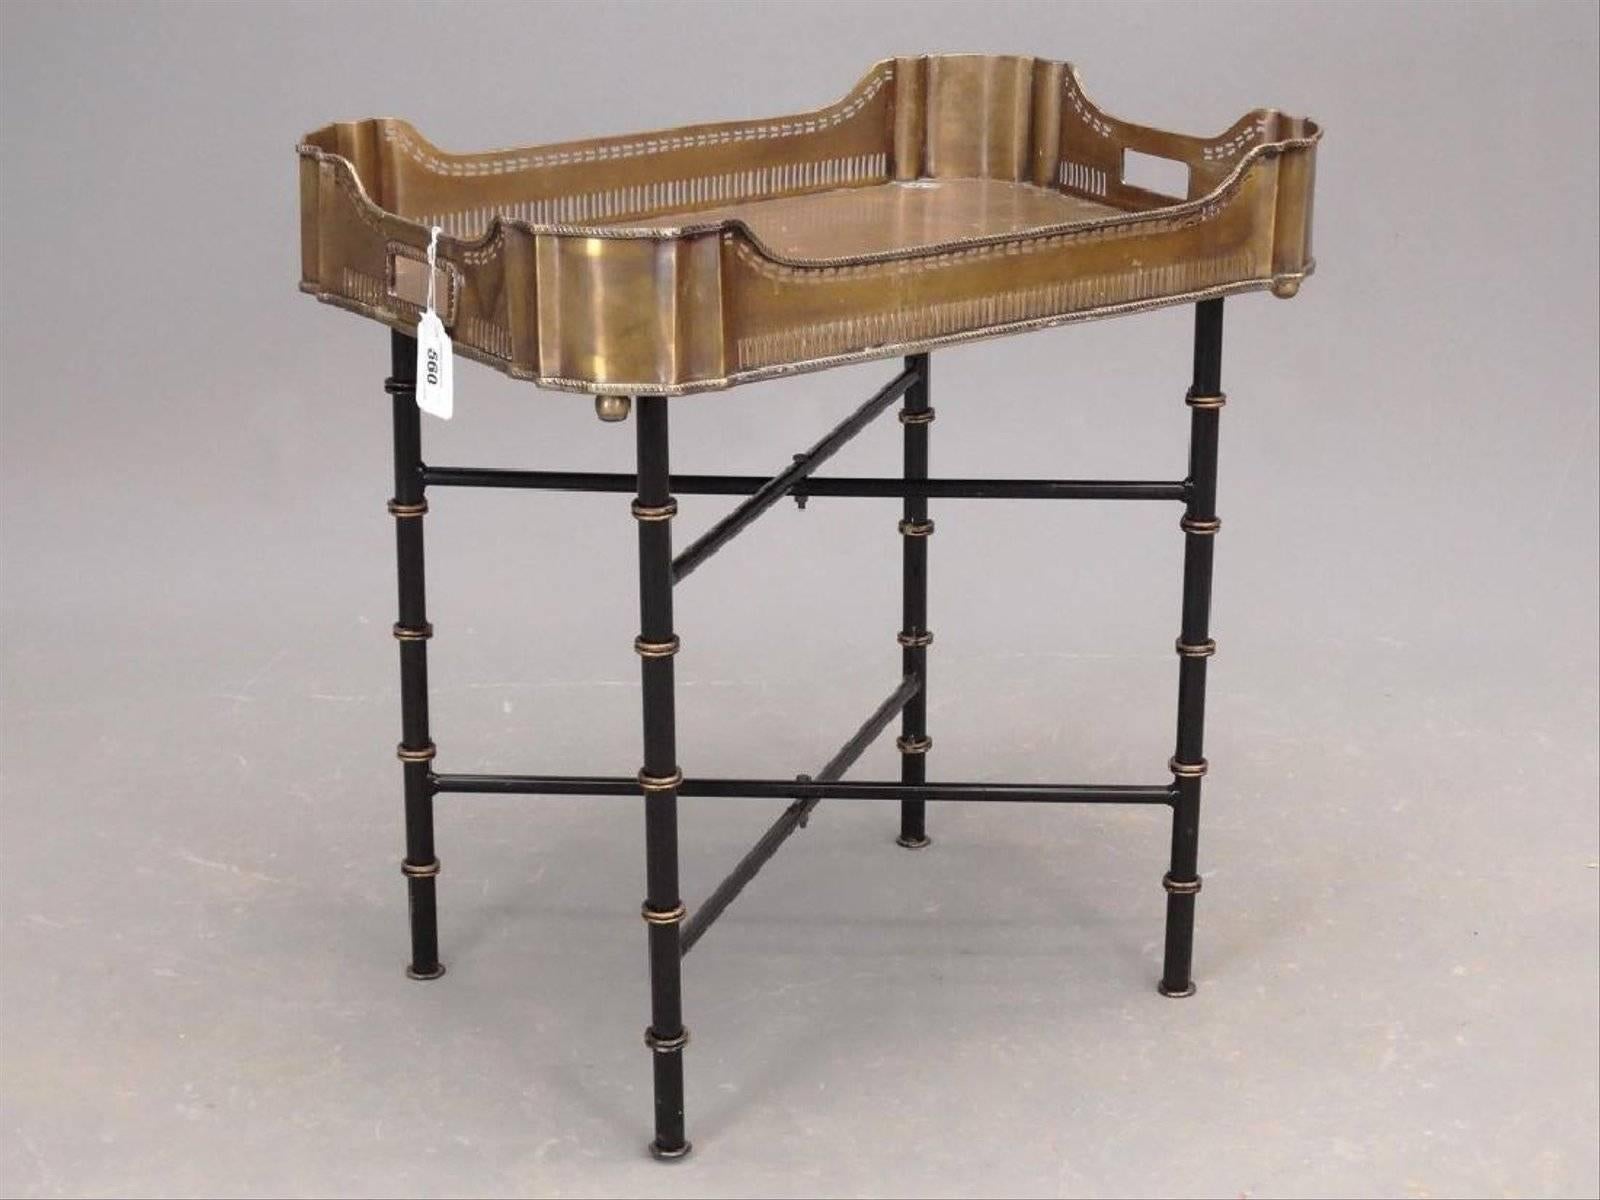 The vintage brass gallery tray coffee table or side table sits on crisscross table legs that collapse for easy storage. The tray has filigree sides and the metal legs are painted lacquer black with spaced gold rings imitating faux bamboo. The top of